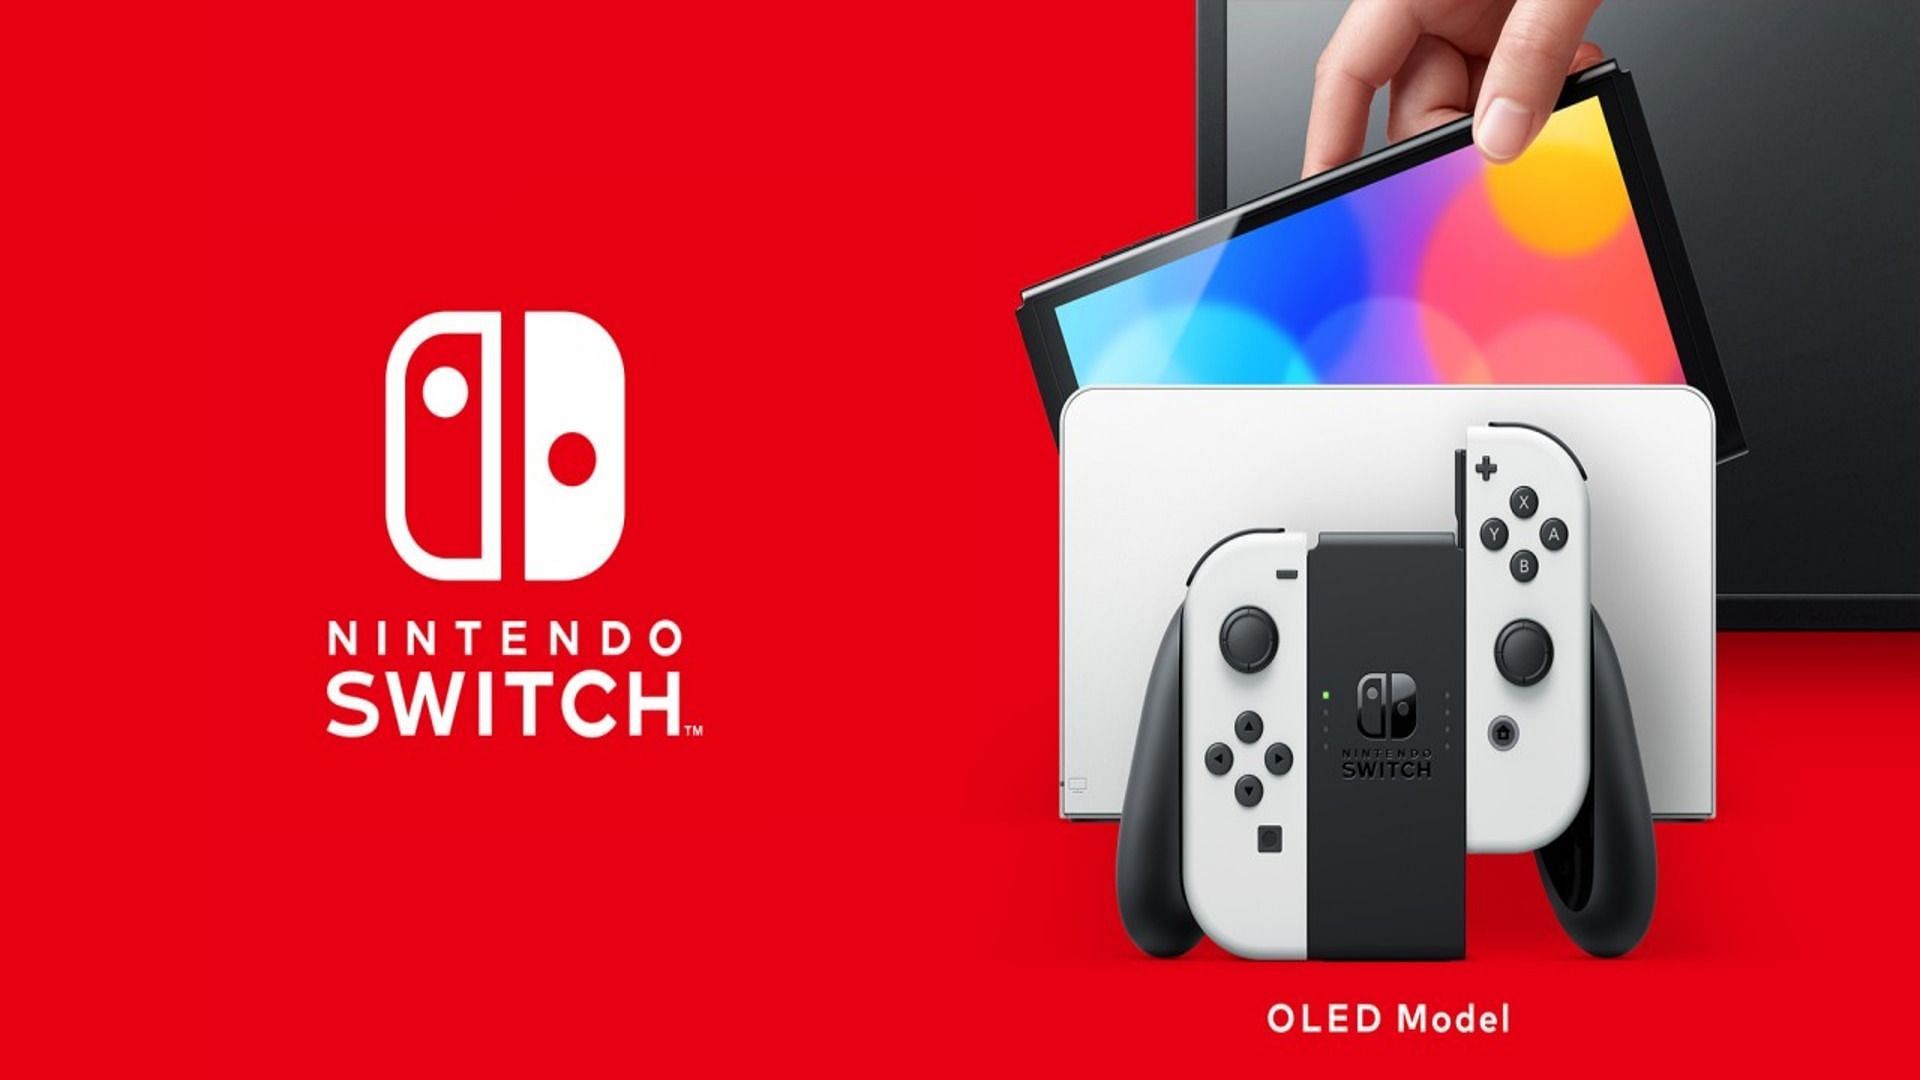 The Nintendo Switch is starting to show its age, so making the game look graphically appealing will be a bit of a challenge (Image via Nintendo)